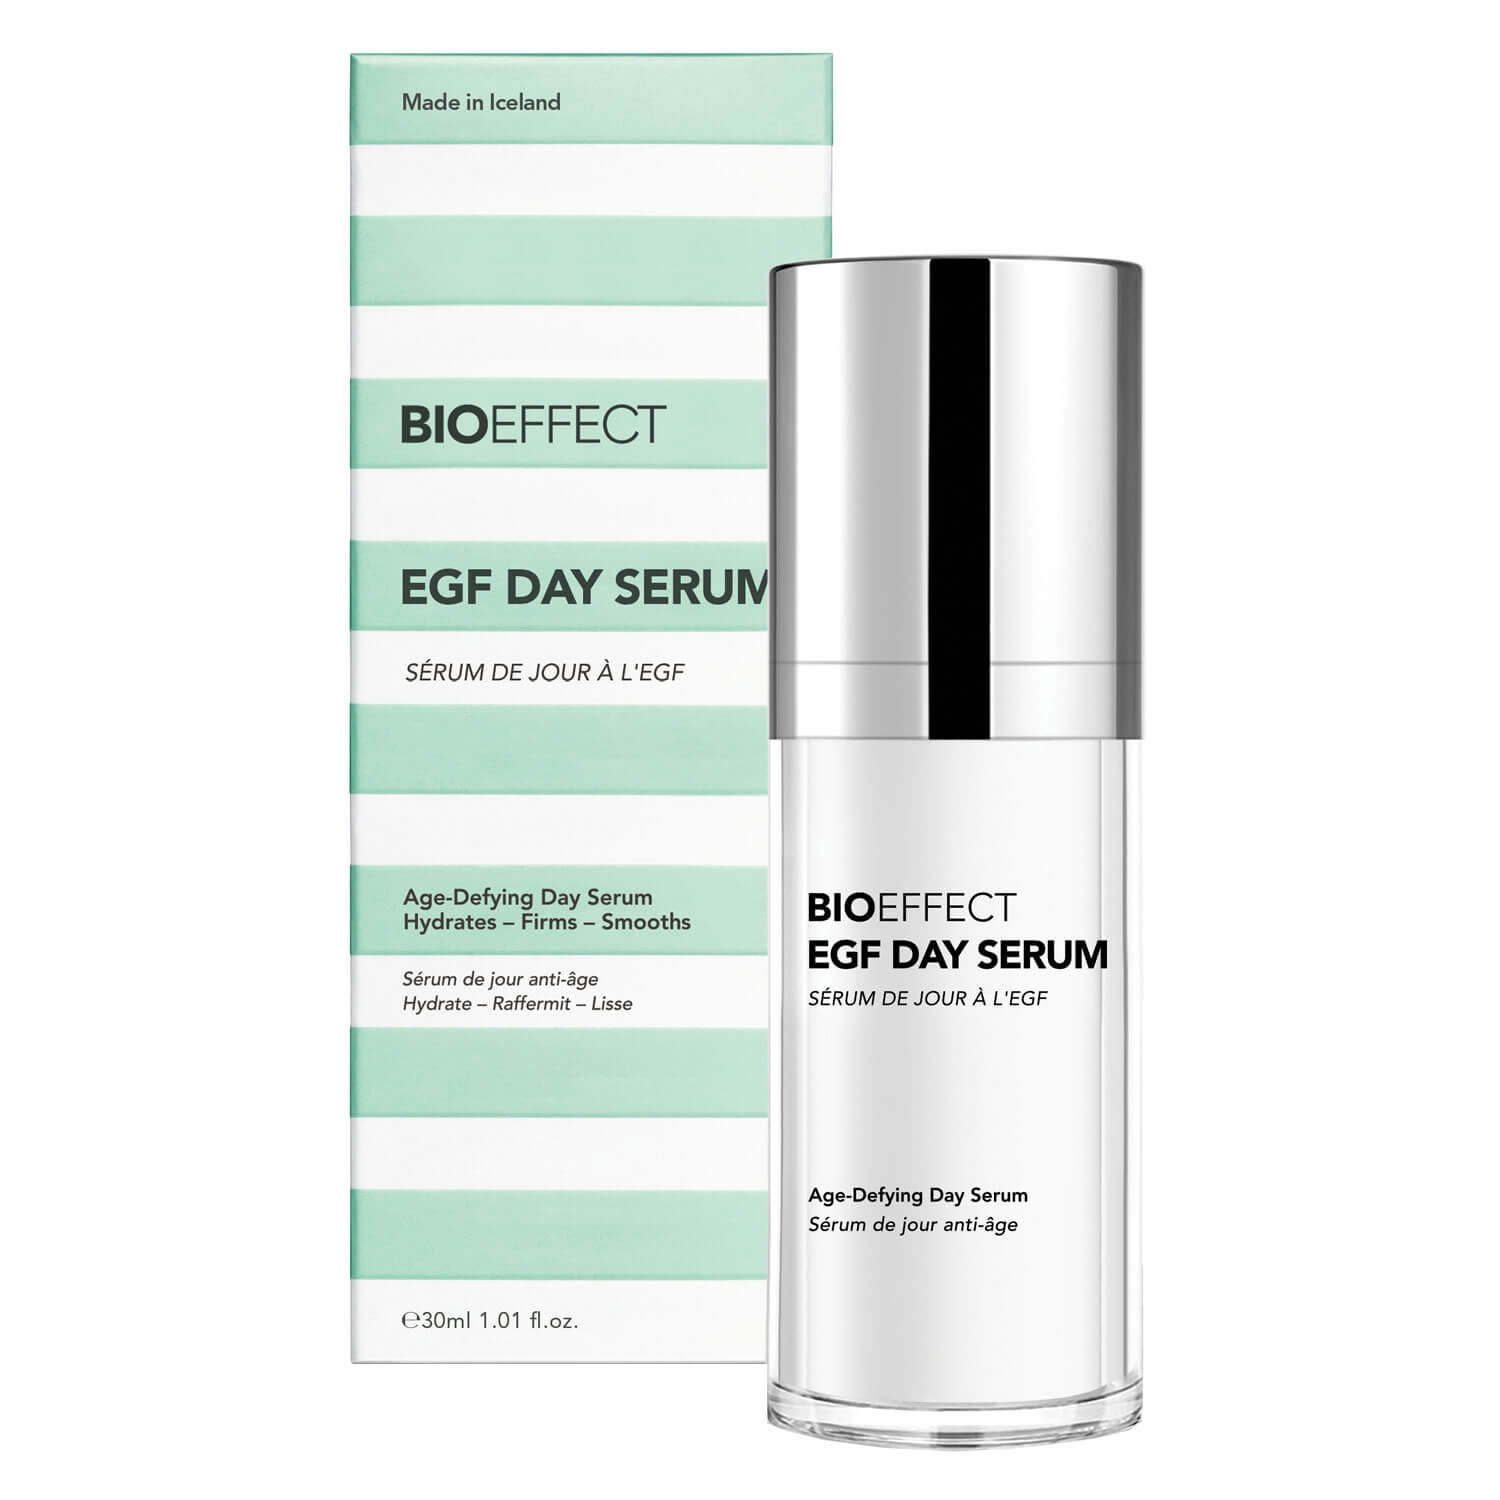 Product image from BIOEFFECT - EGF DAY SERUM